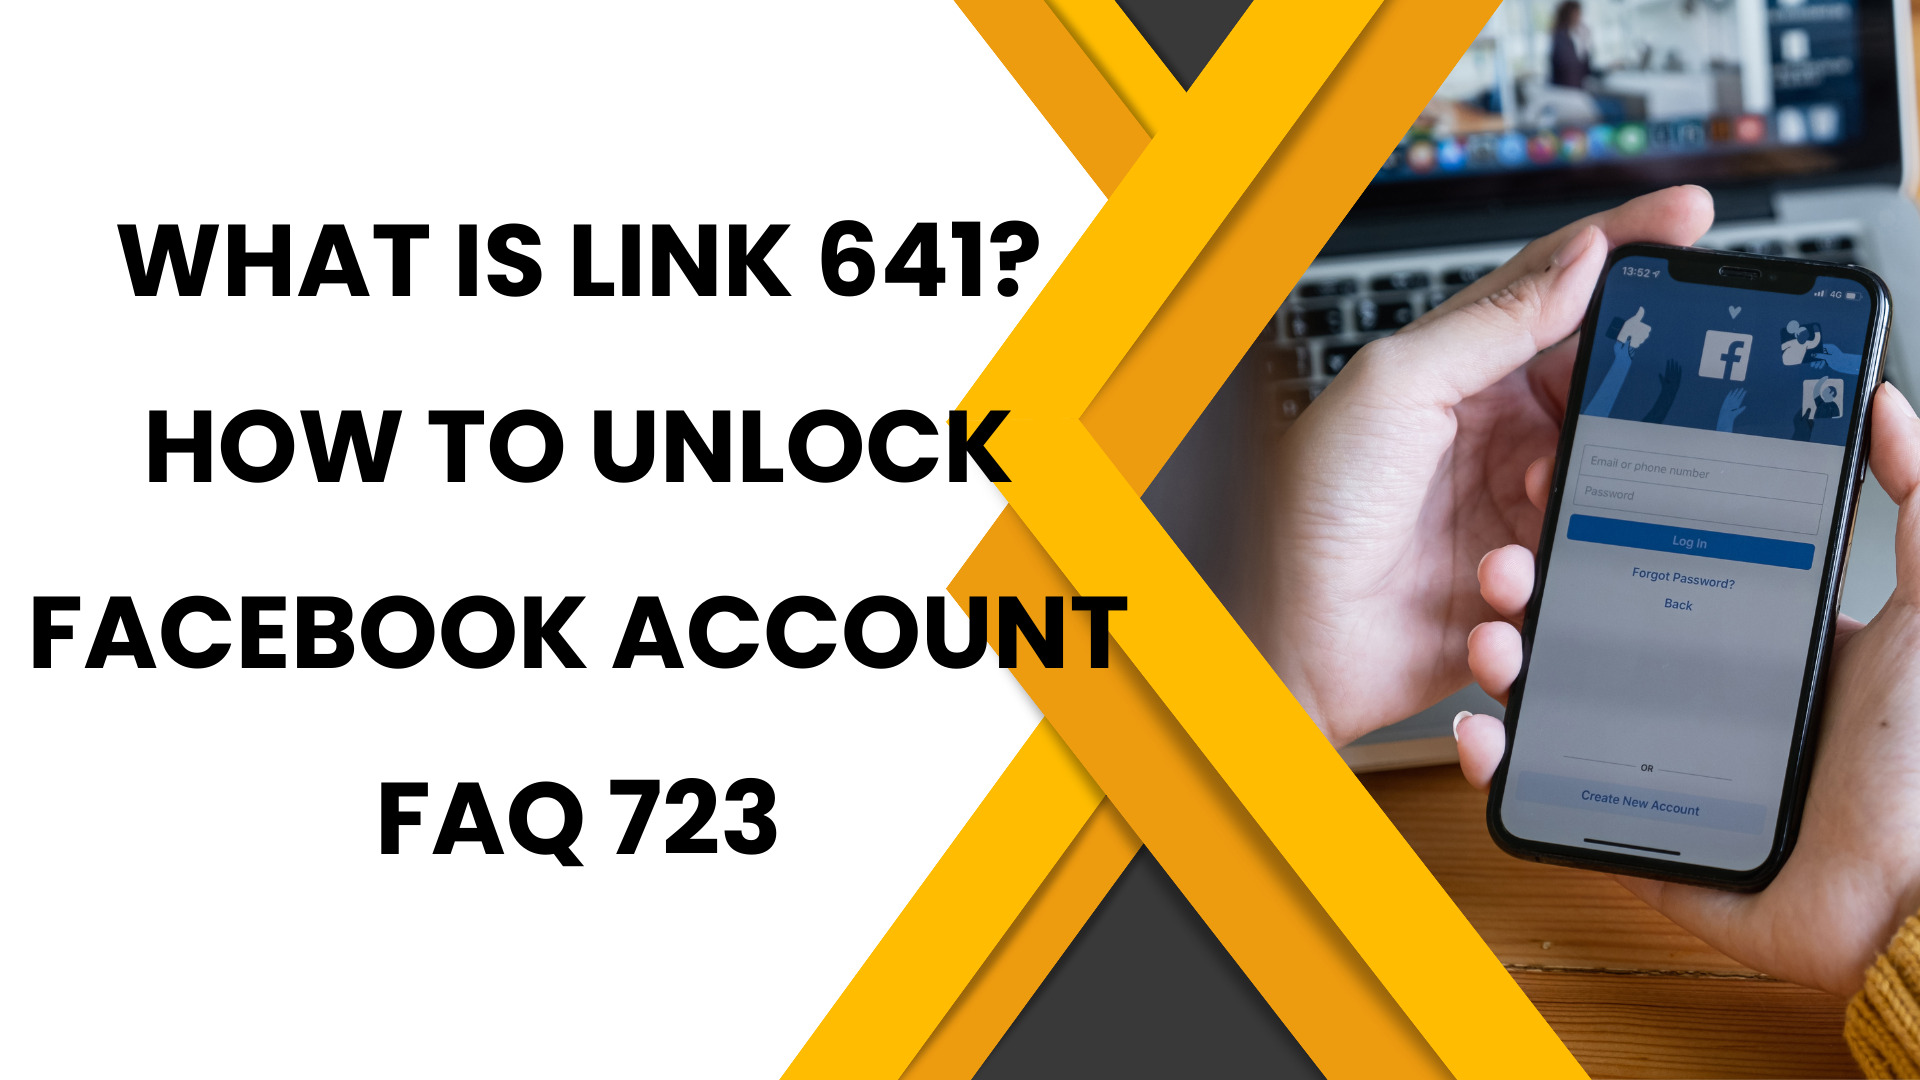 What is Link 641? How to unlock Facebook account FAQ 723